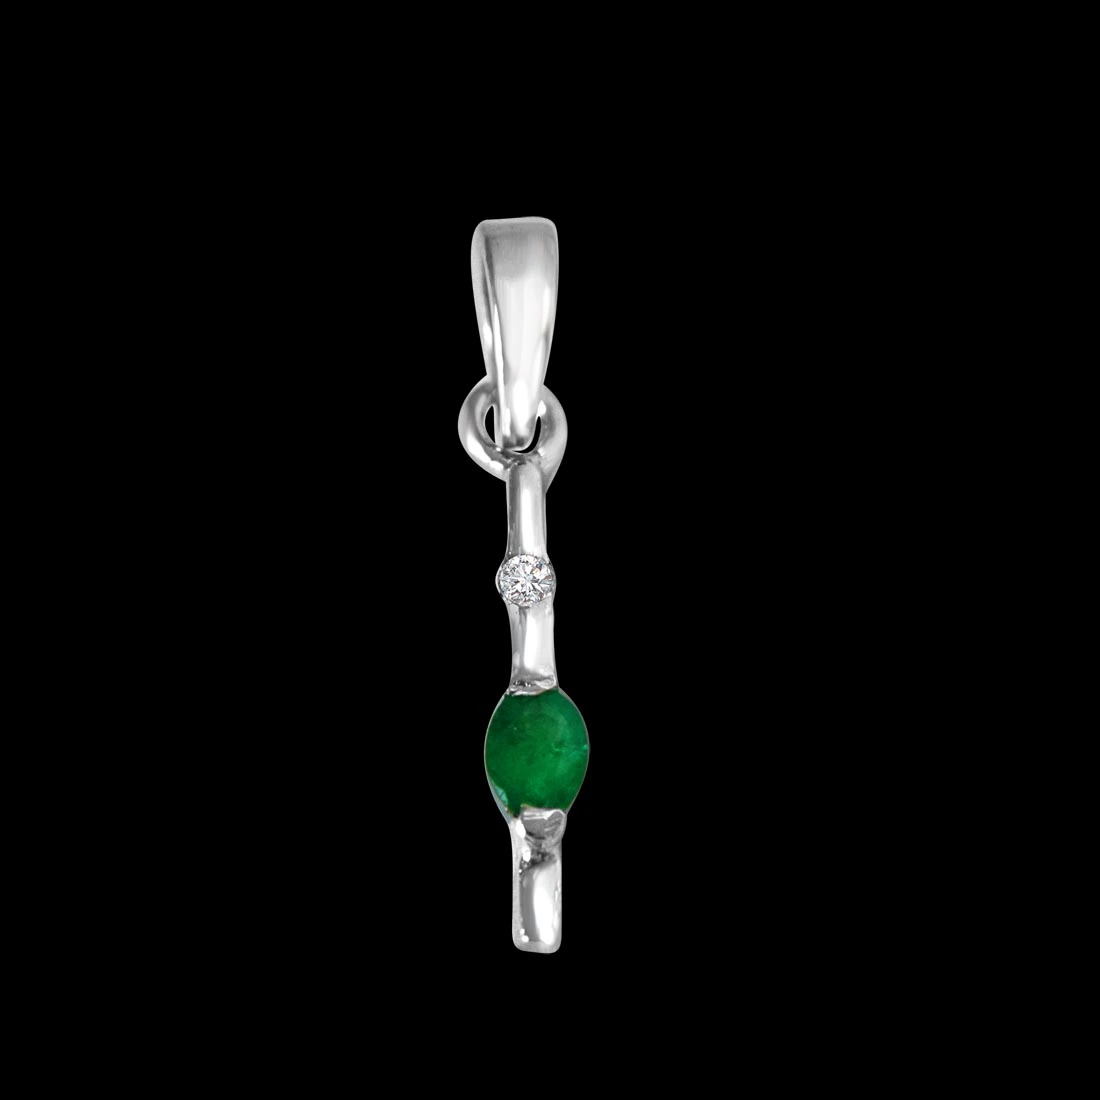 Green Stick - Real Diamond & Green Emerald Pendant in Sterling Silver with 18 IN Chain (SDP247)